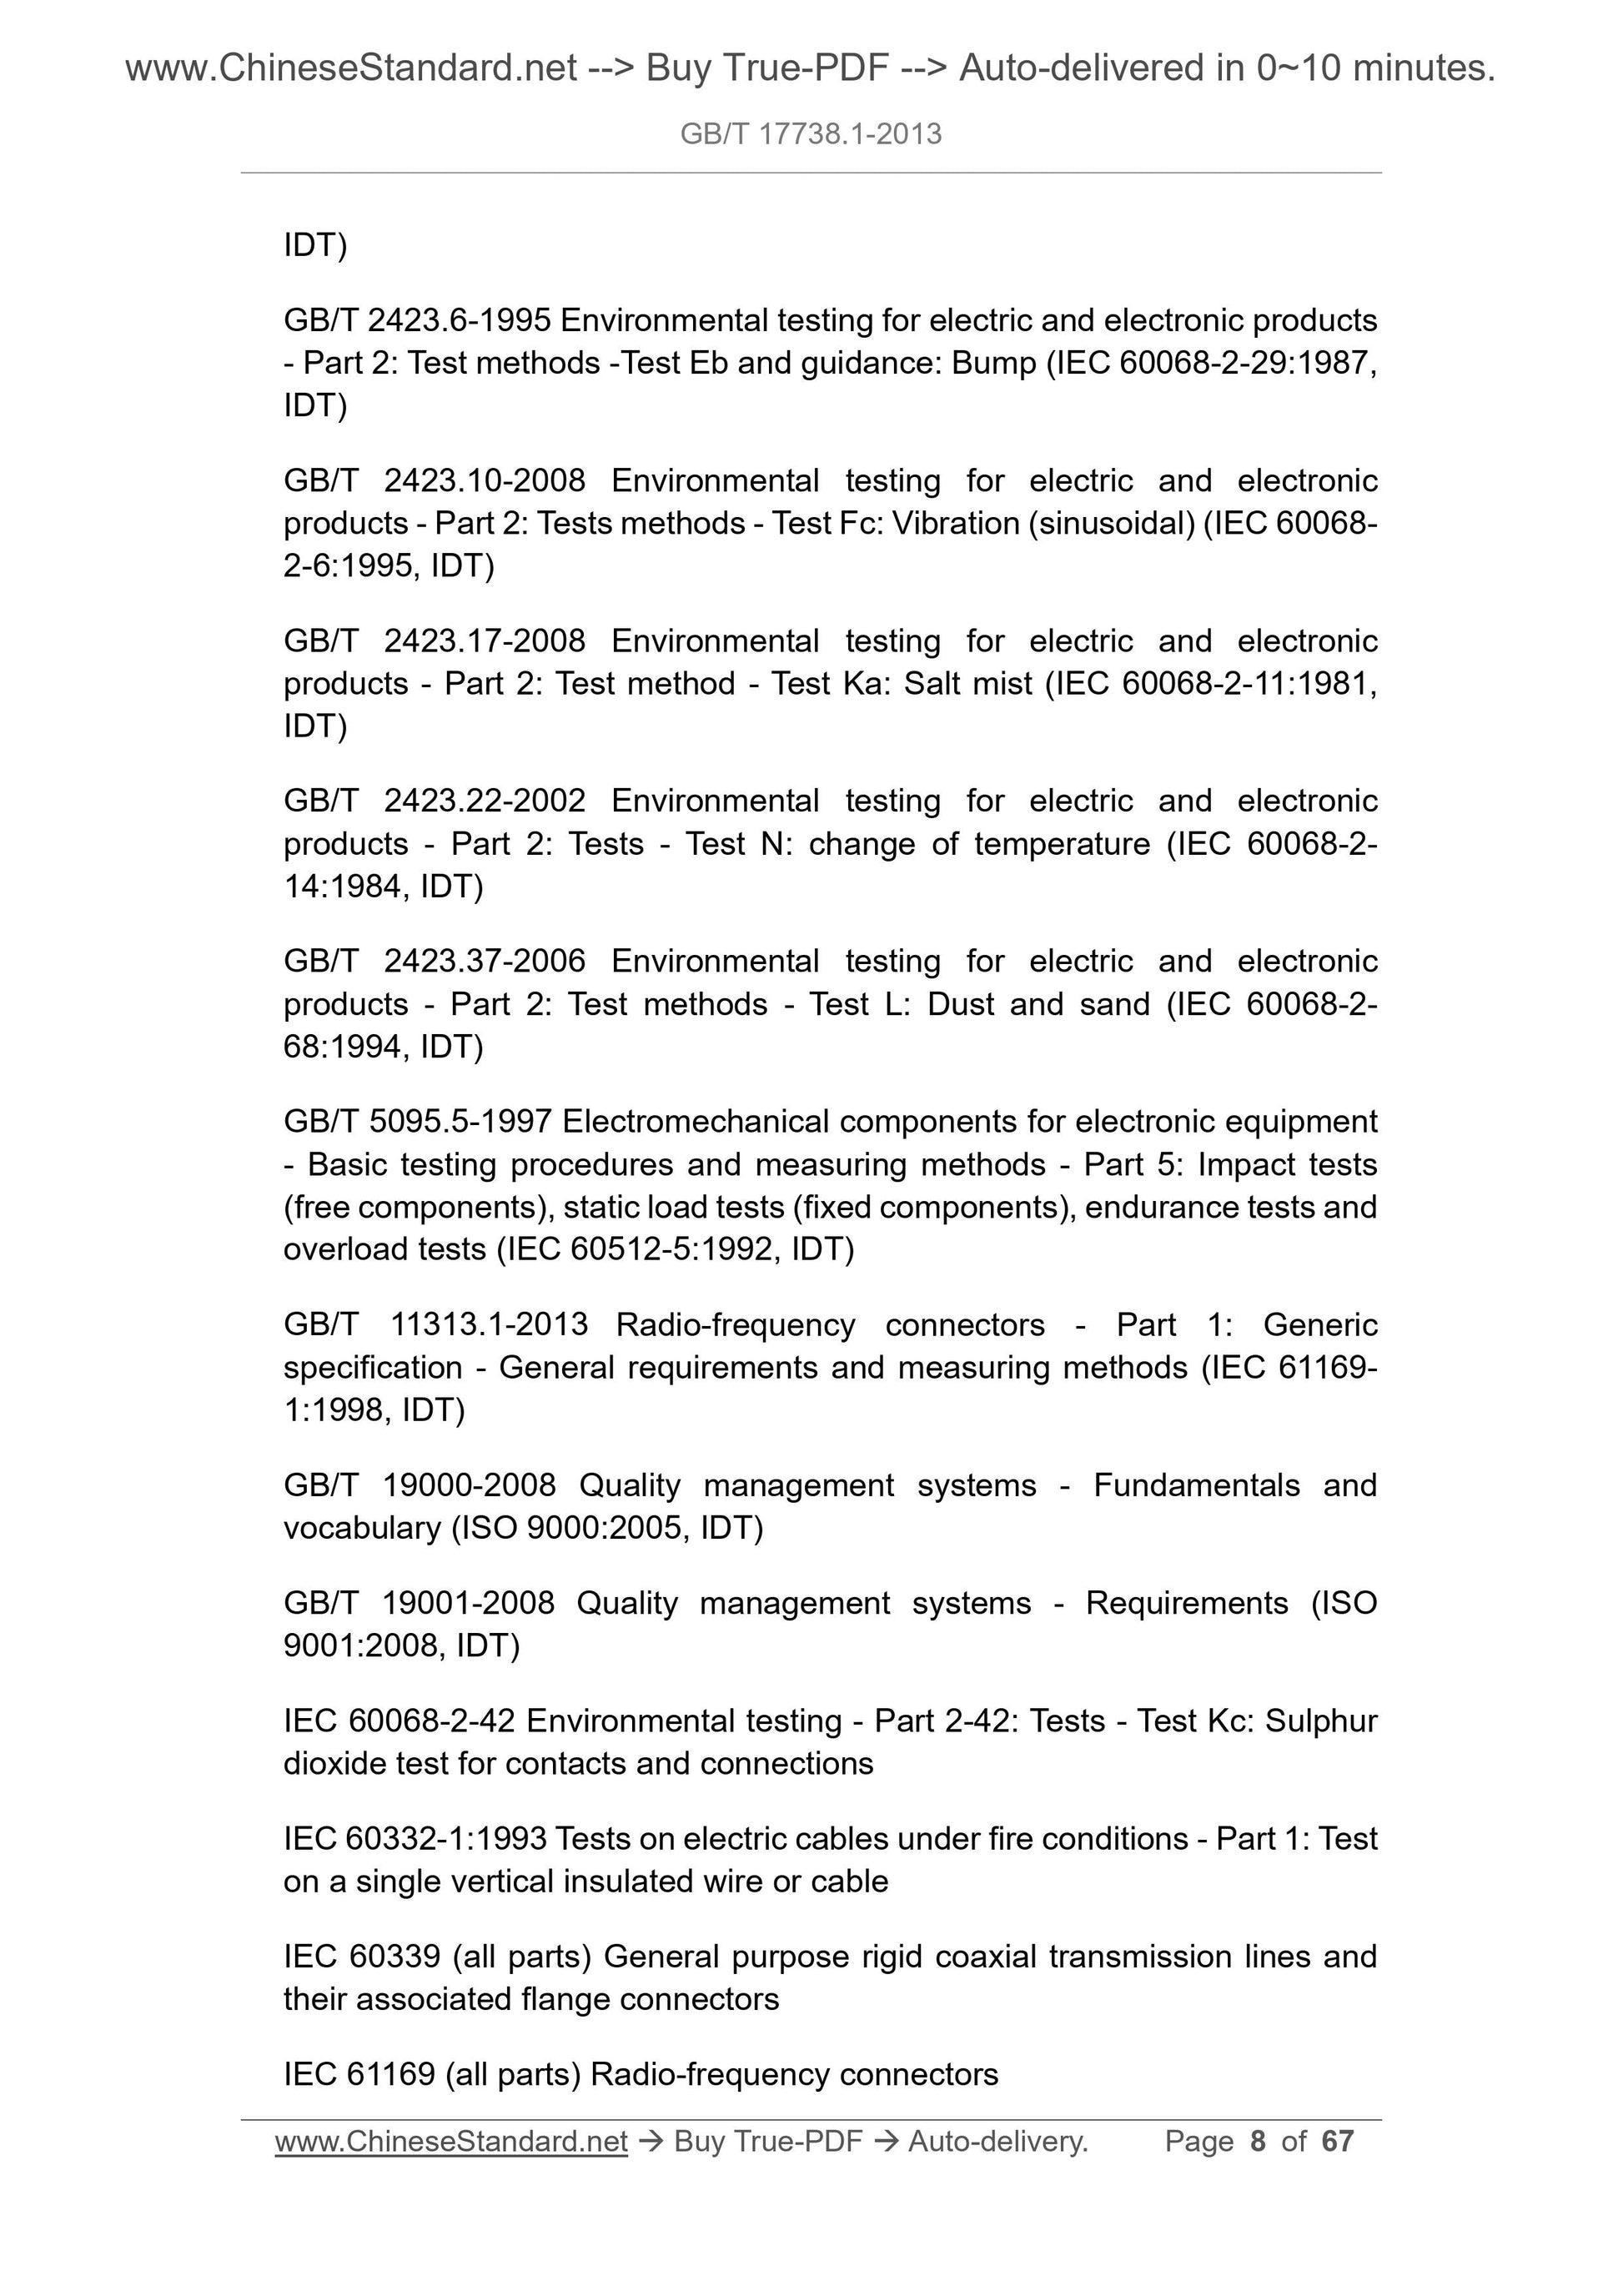 GB/T 17738.1-2013 Page 7